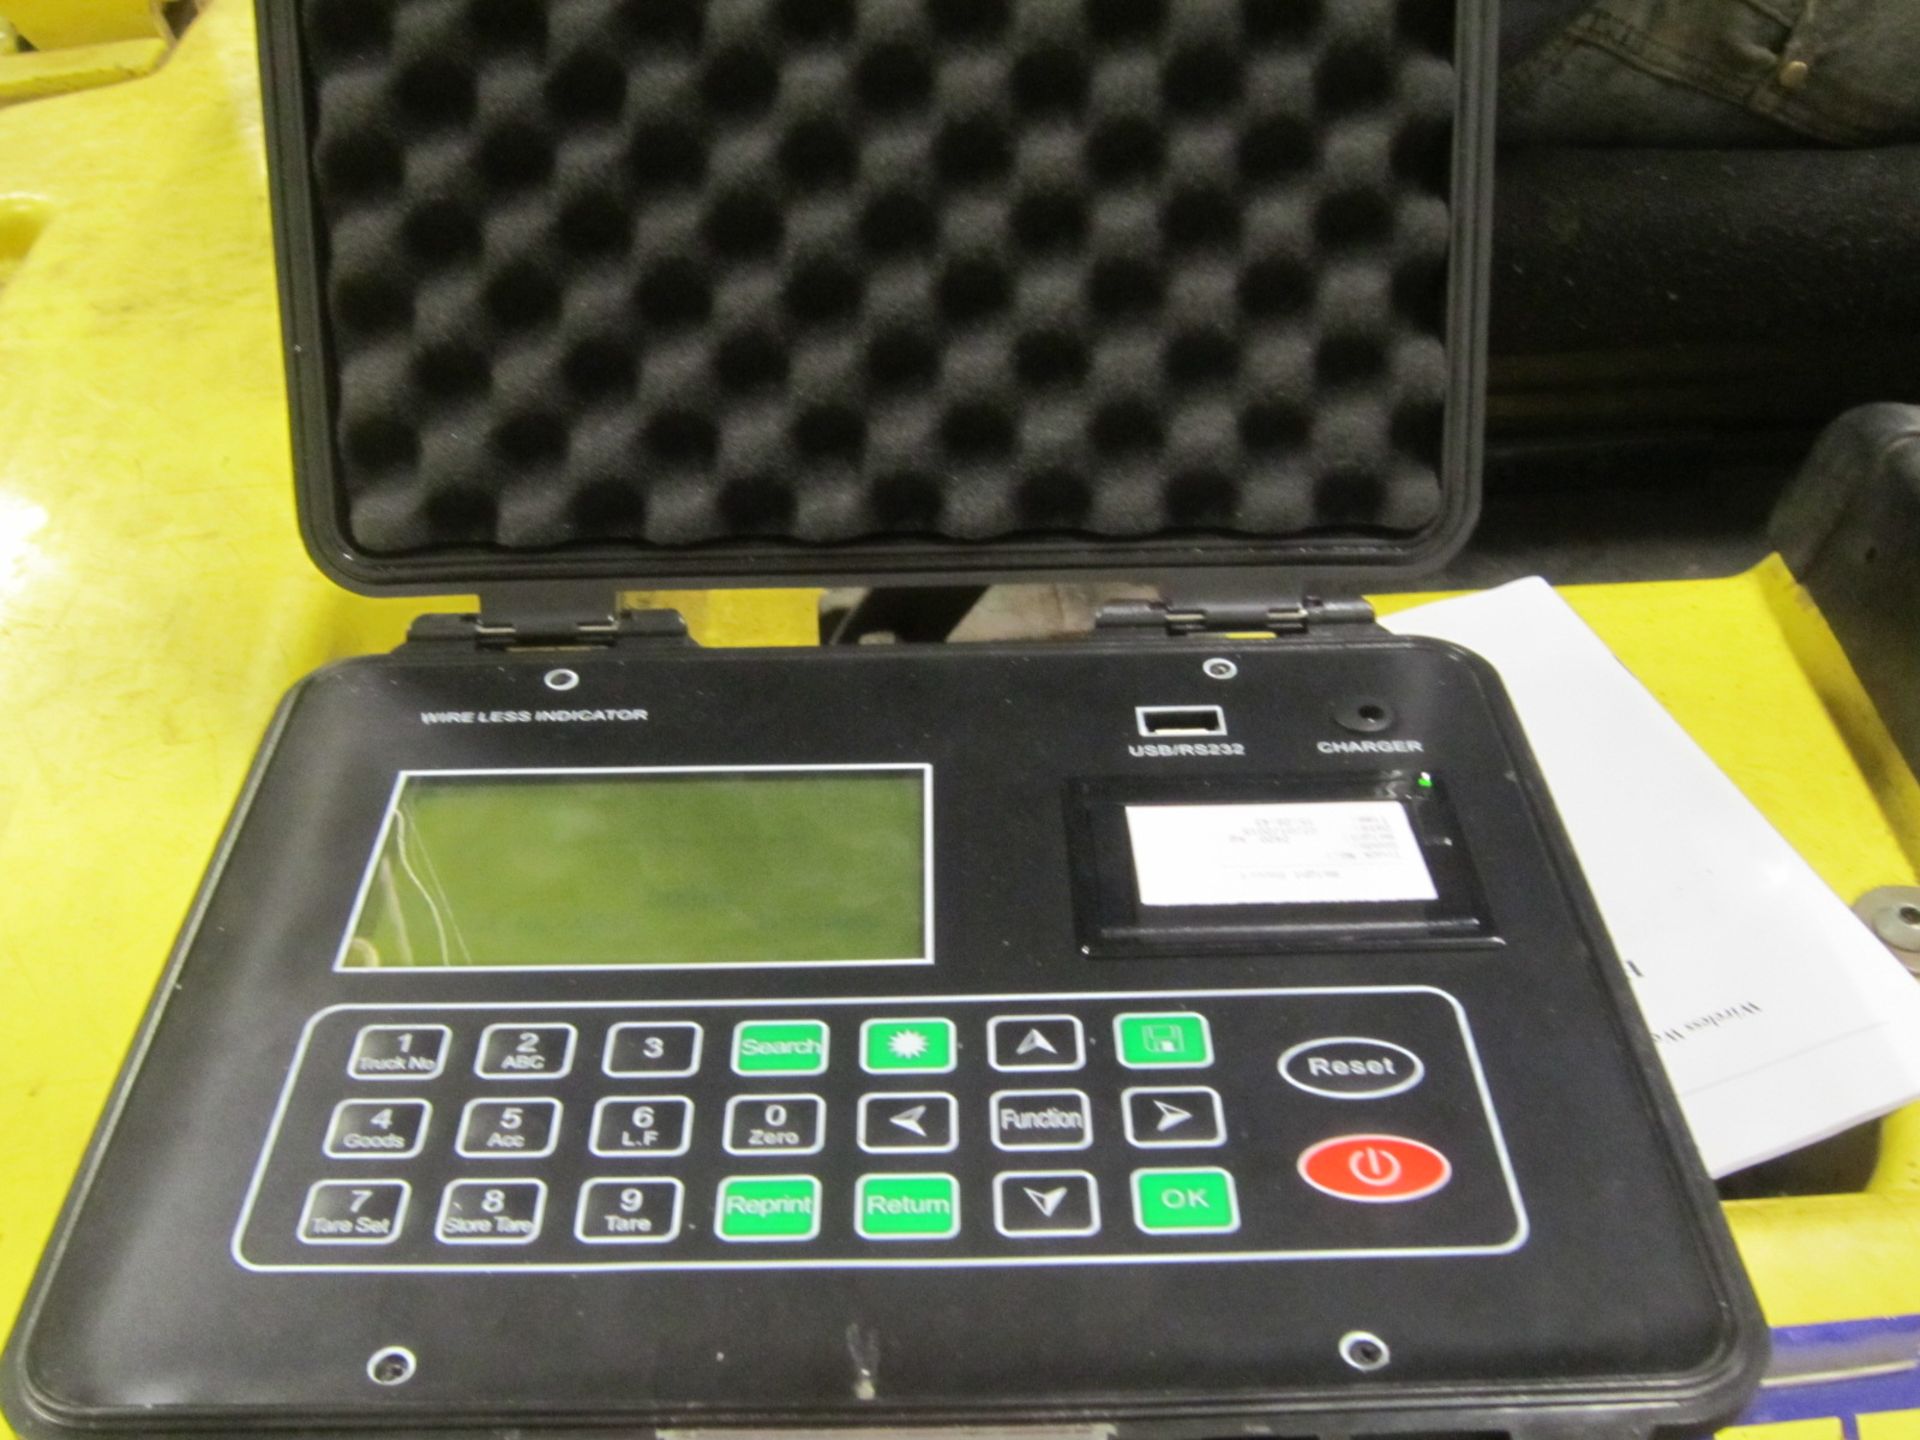 RW 10 TON Wireless Crane Scale with Digital Readout in Breifcase with charger up to 20000lbs - Image 2 of 3